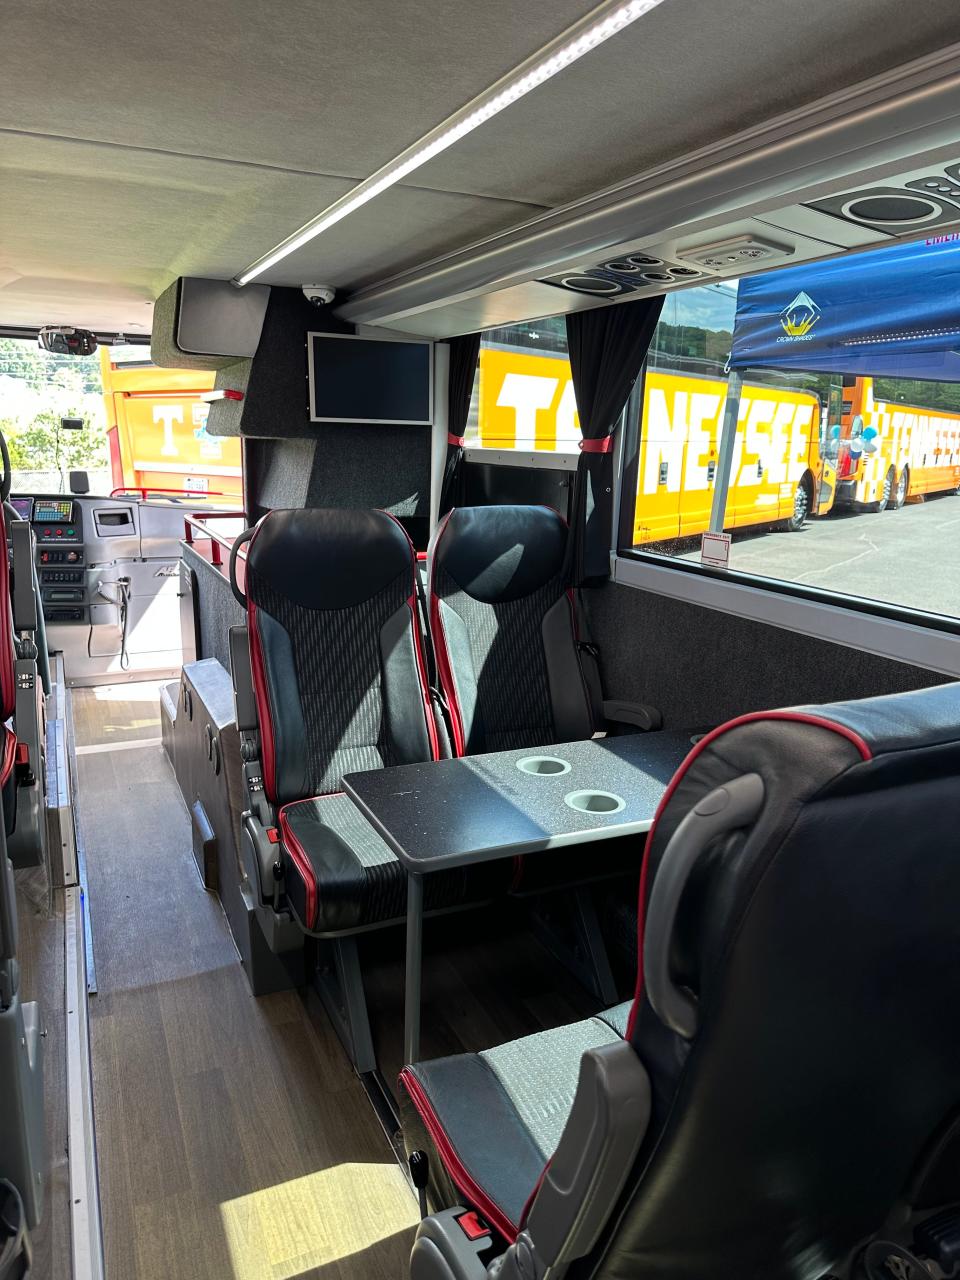 Visitors at the event enjoyed tours of the luxury motorcoaches.